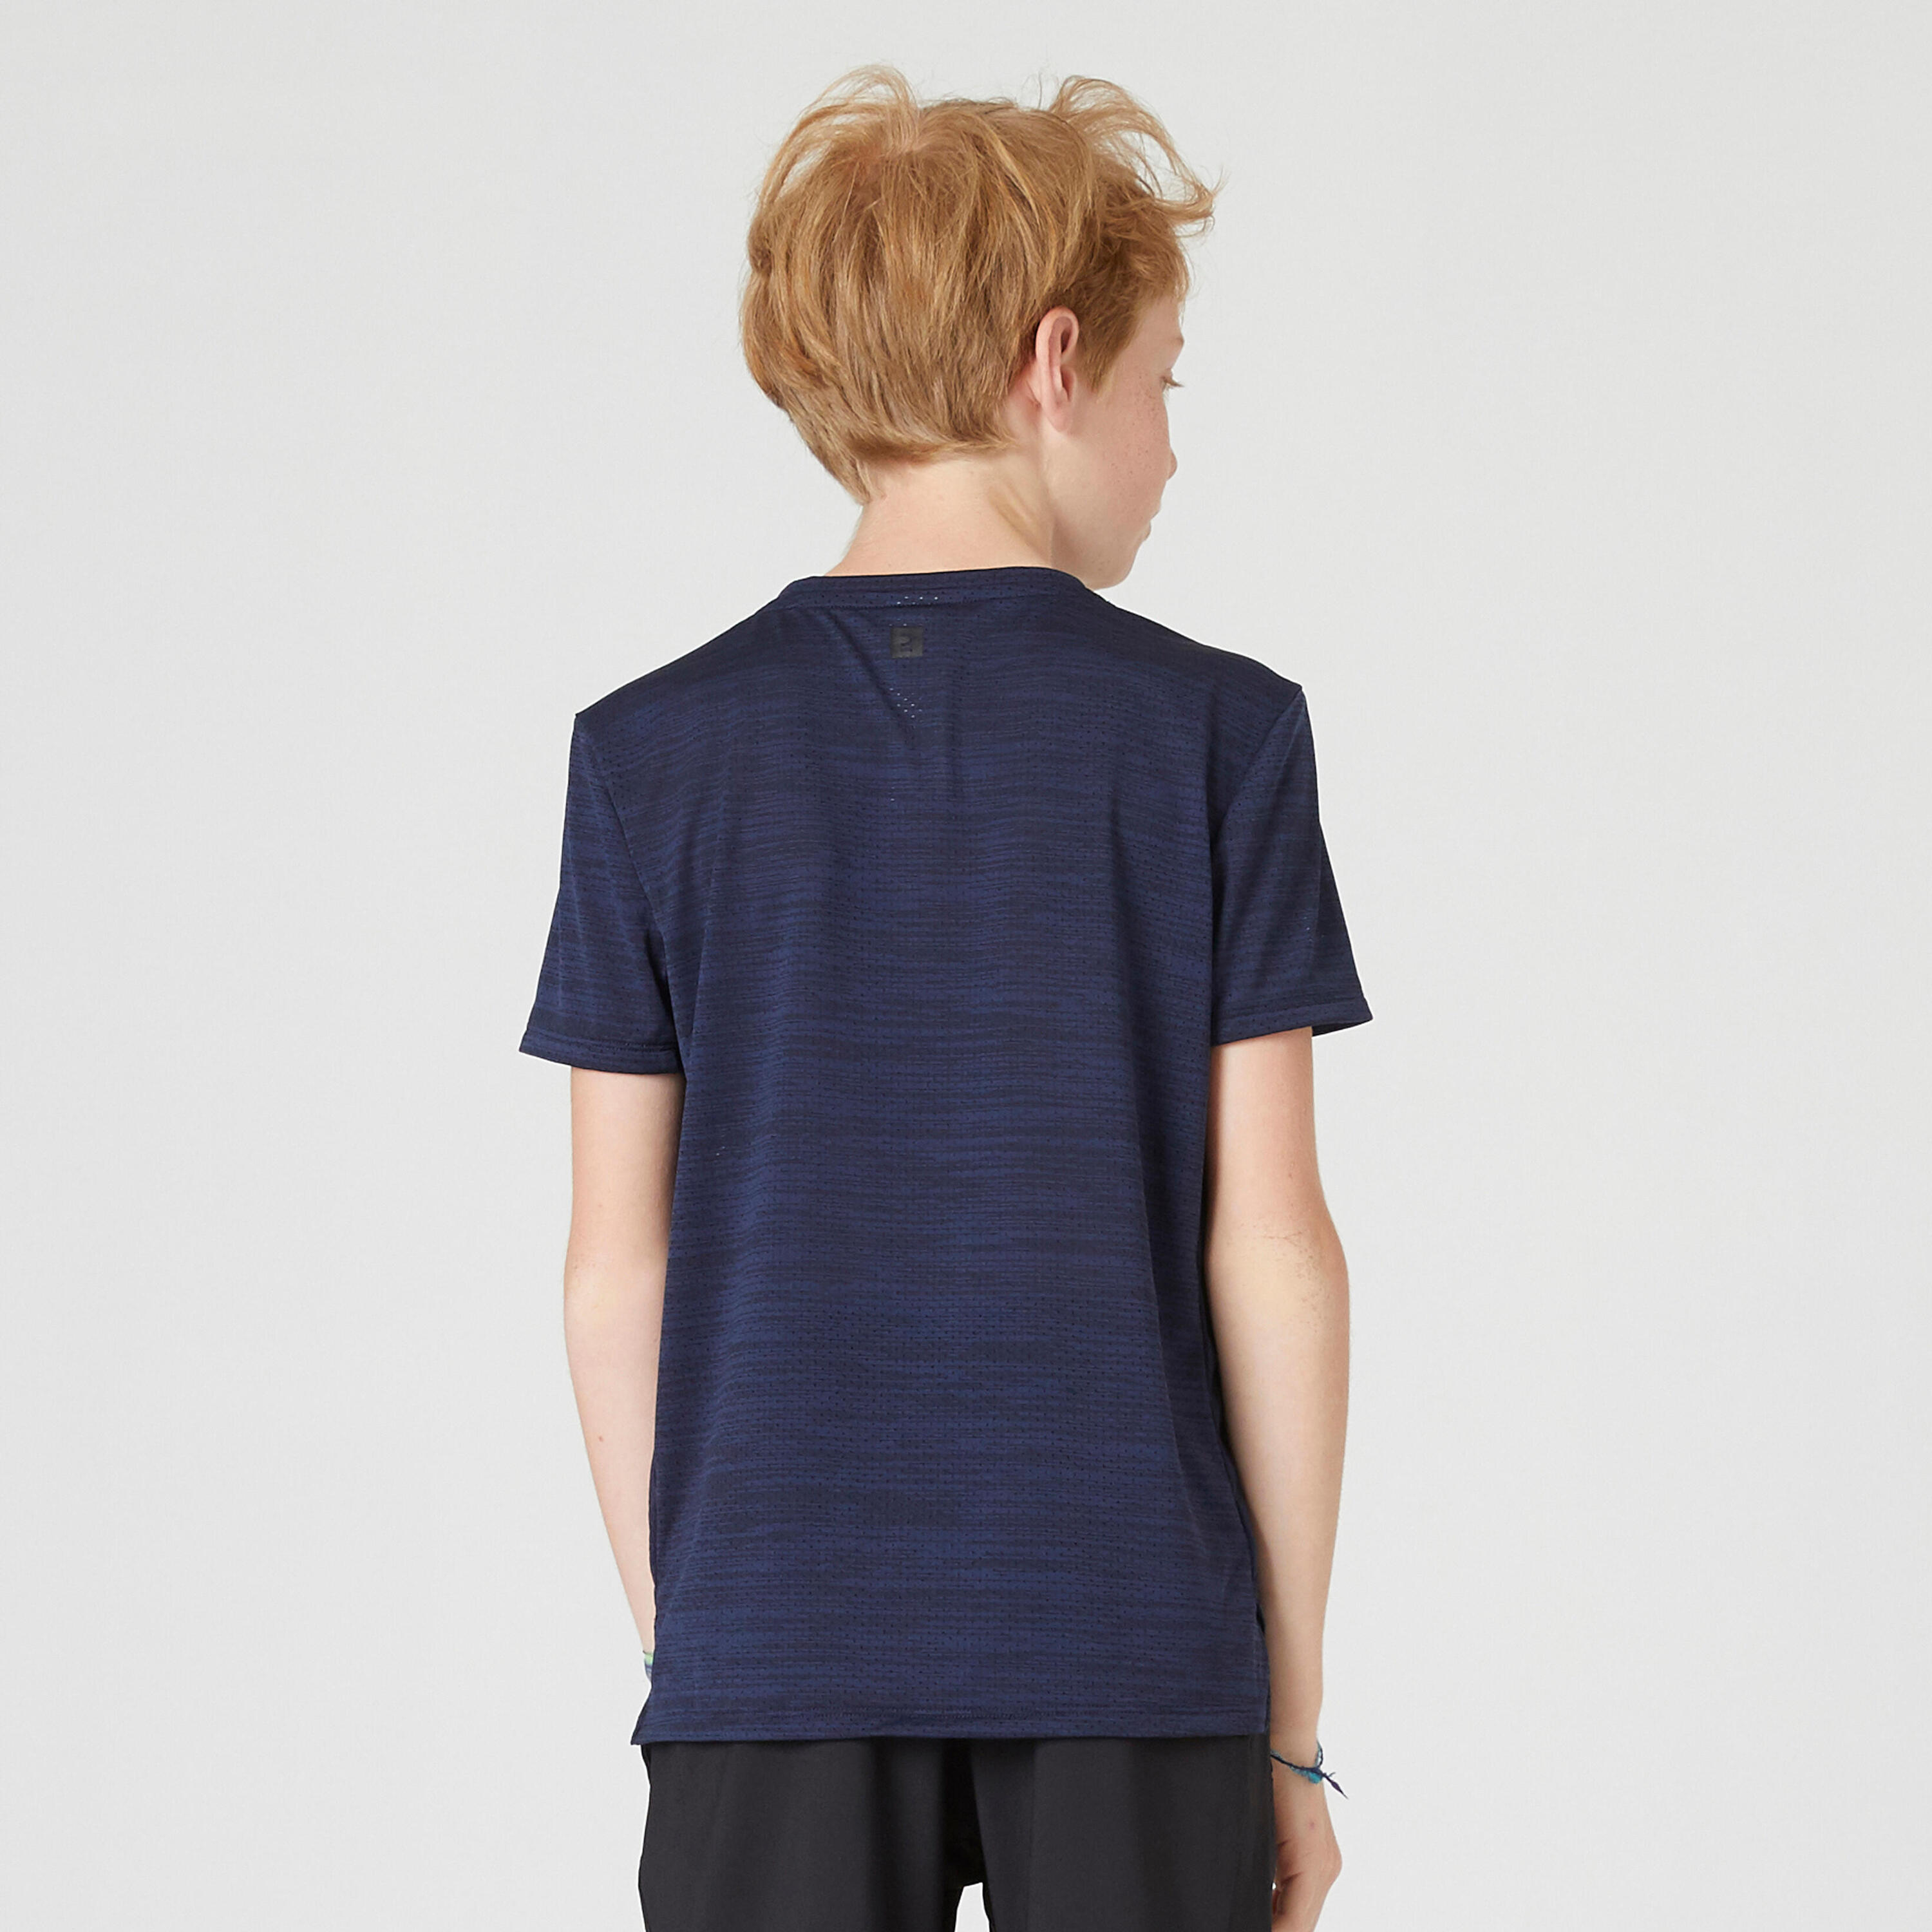 Kids' Synthetic Breathable T-Shirt S500 - Navy 4/5